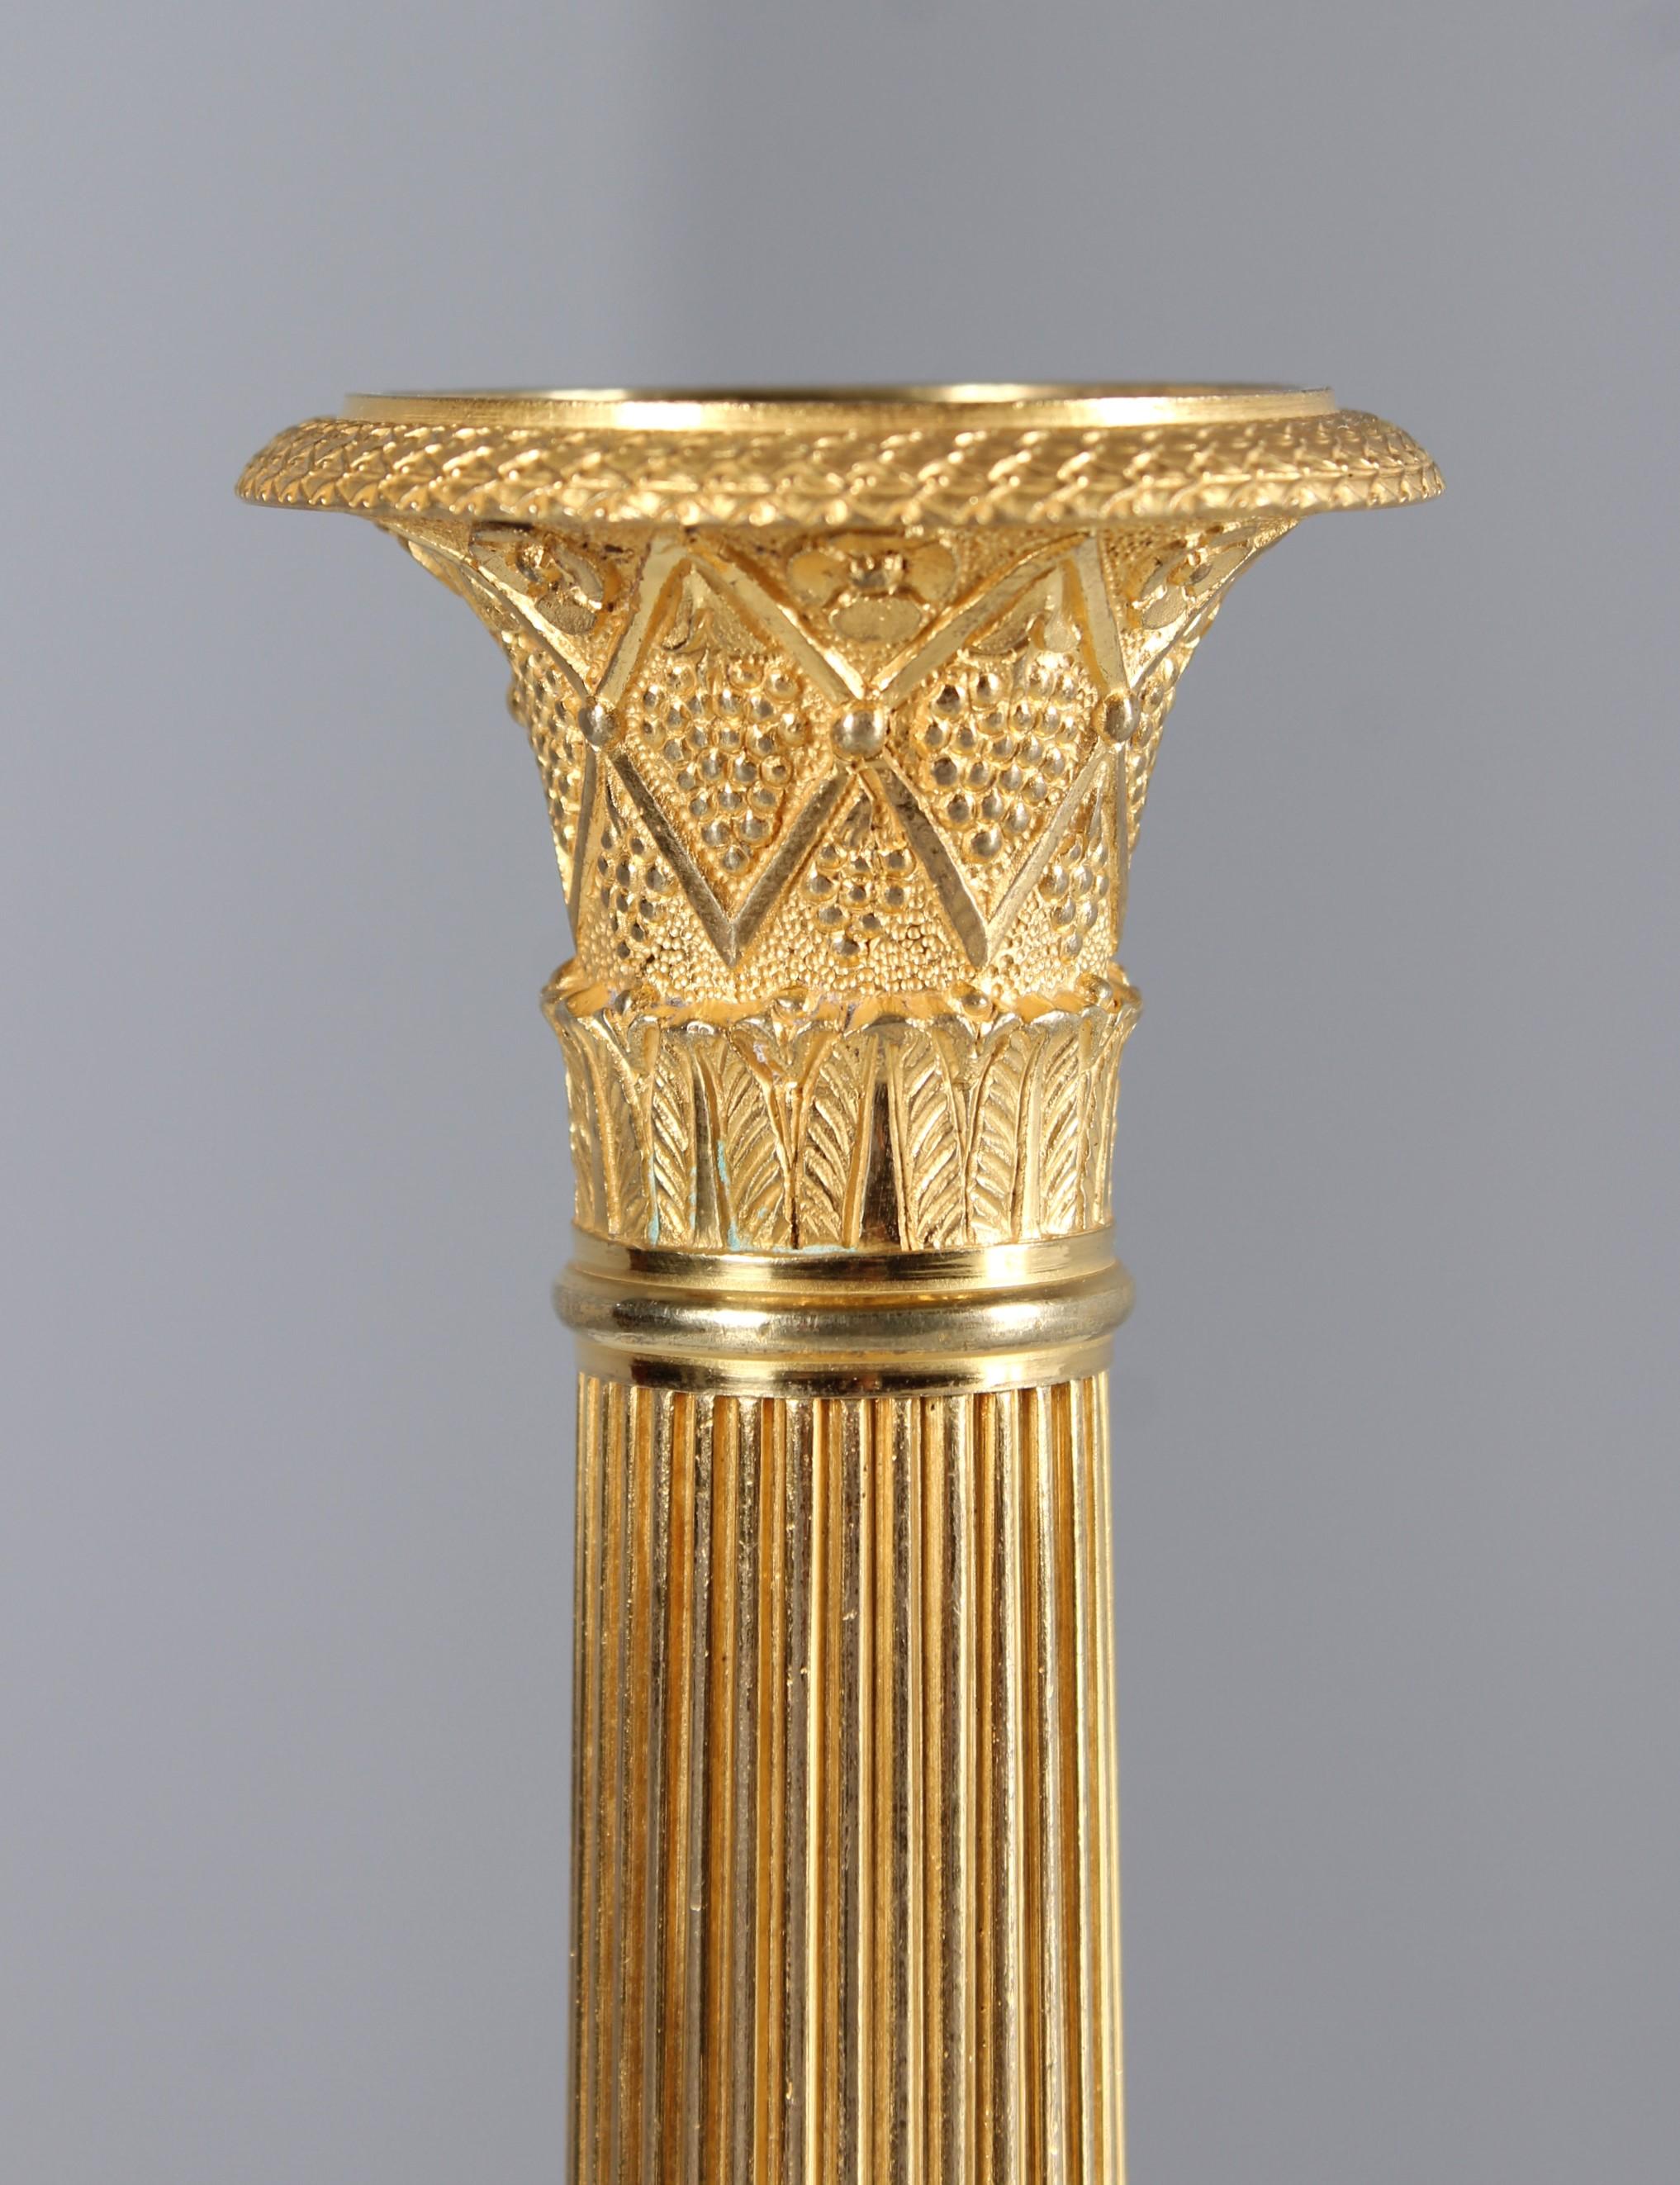 Antique candlestick

France
Gilt bronze
19th century

Dimensions: H x D: 27 x 13 cm

Description:
Antique French candlestick from the first half / middle of the 19th century.

Finely crafted with leaf frieze and acanthus tendrils on the round base